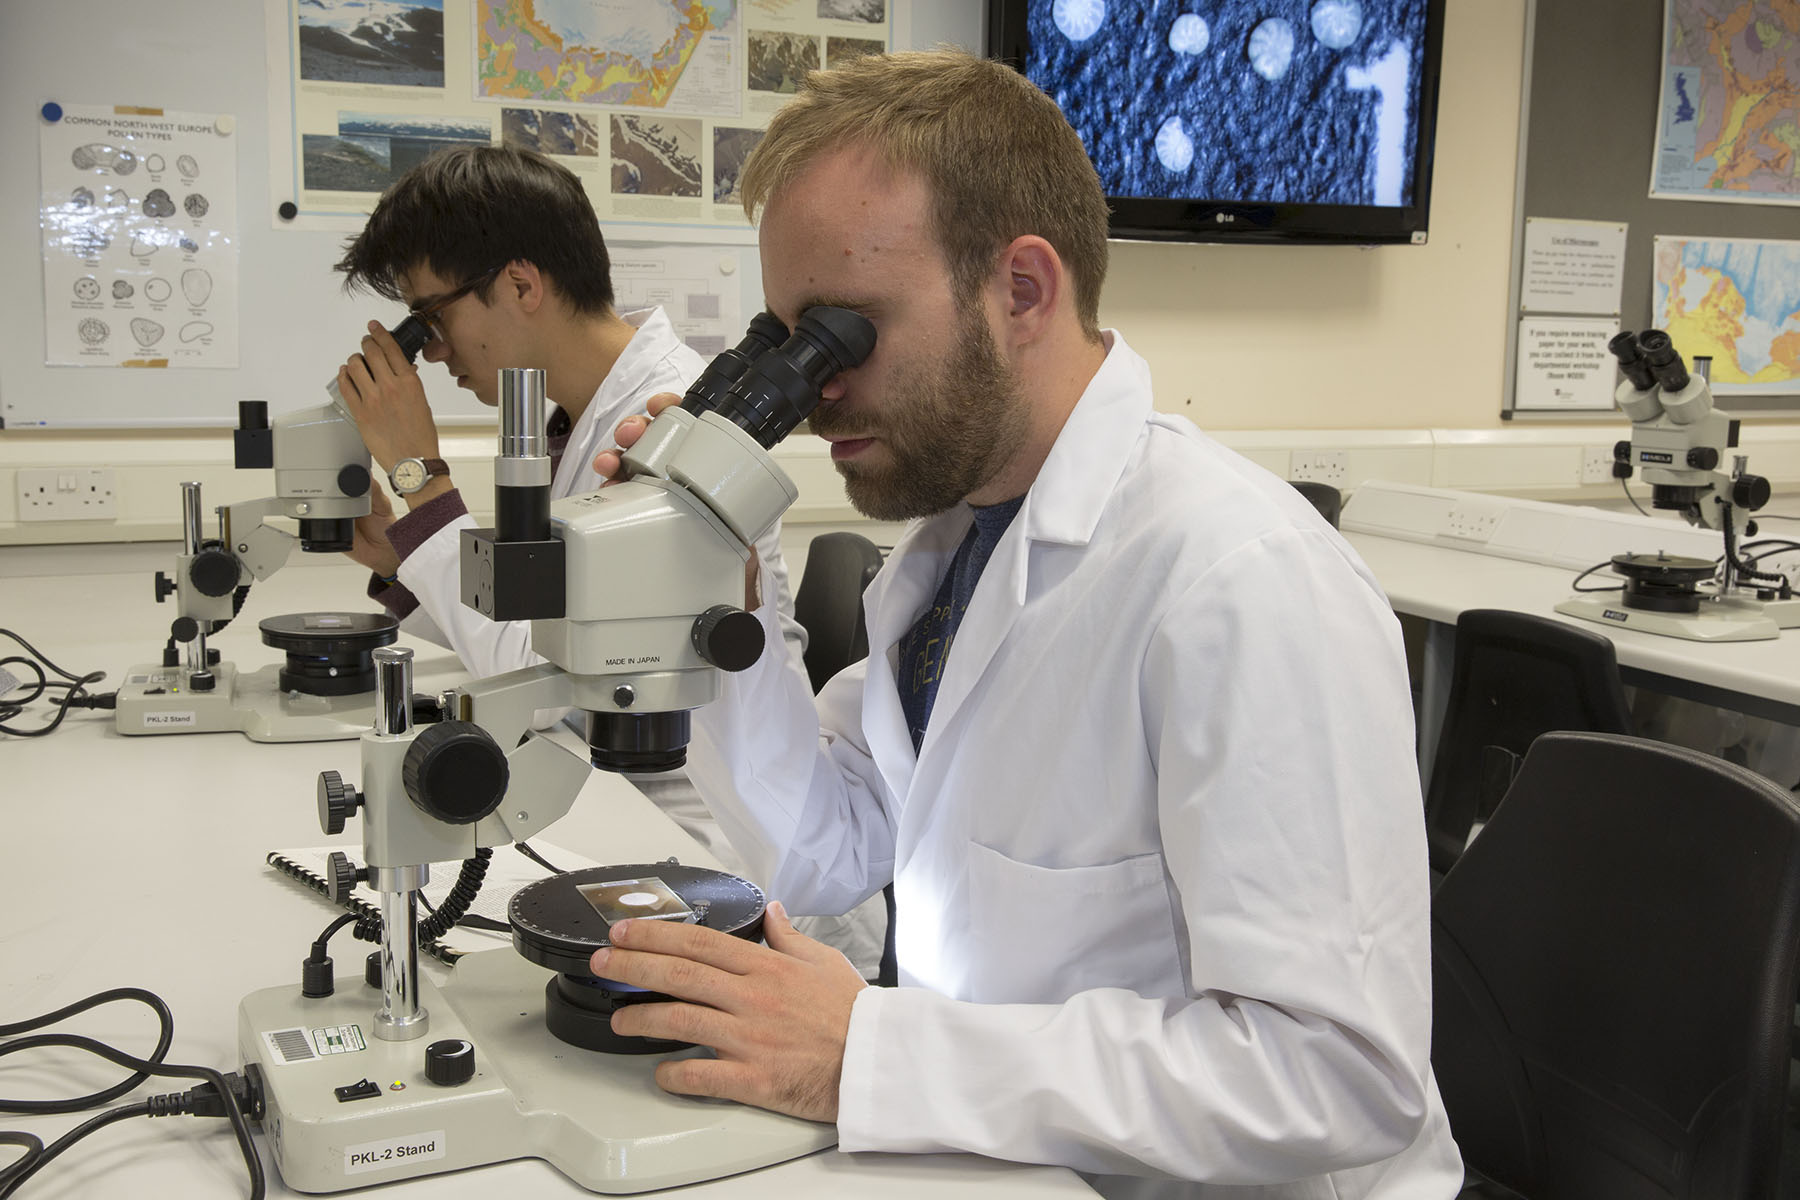 Two people using microscopes